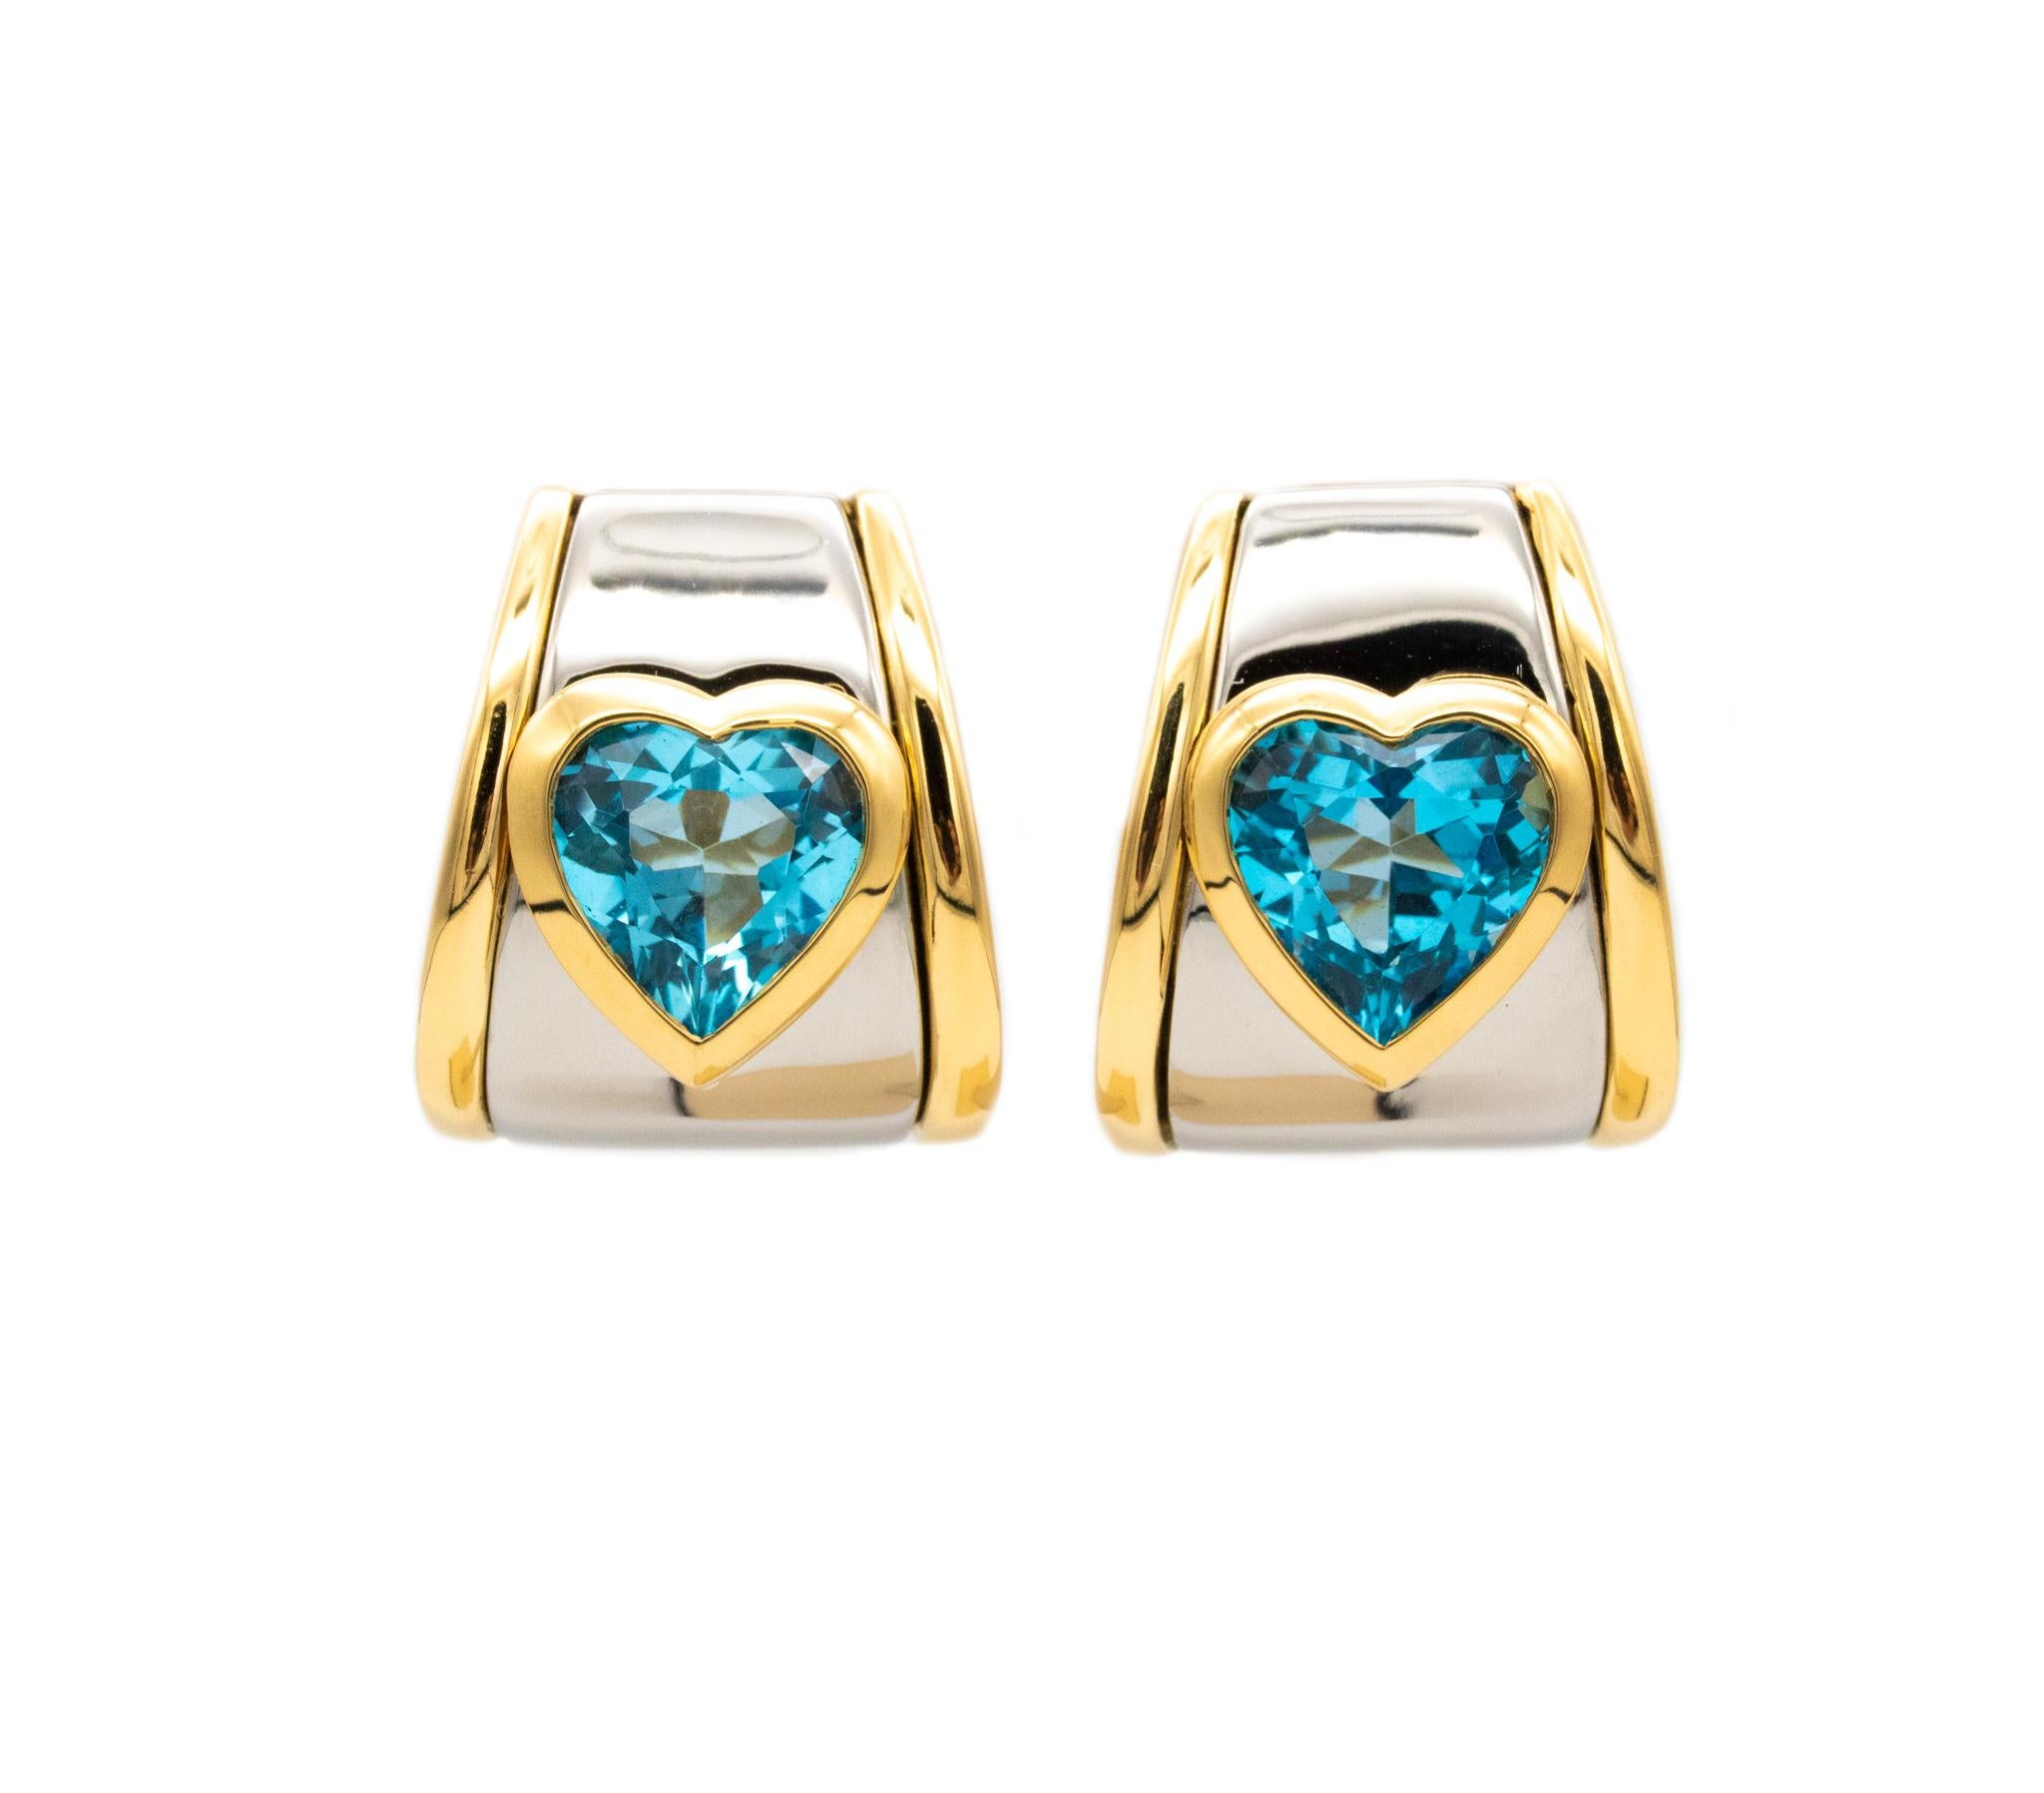 Marina B. Milan Clip Earrings In 18Kt Gold With 10.55 Ctw Hearts Shaped Topaz For Sale 2